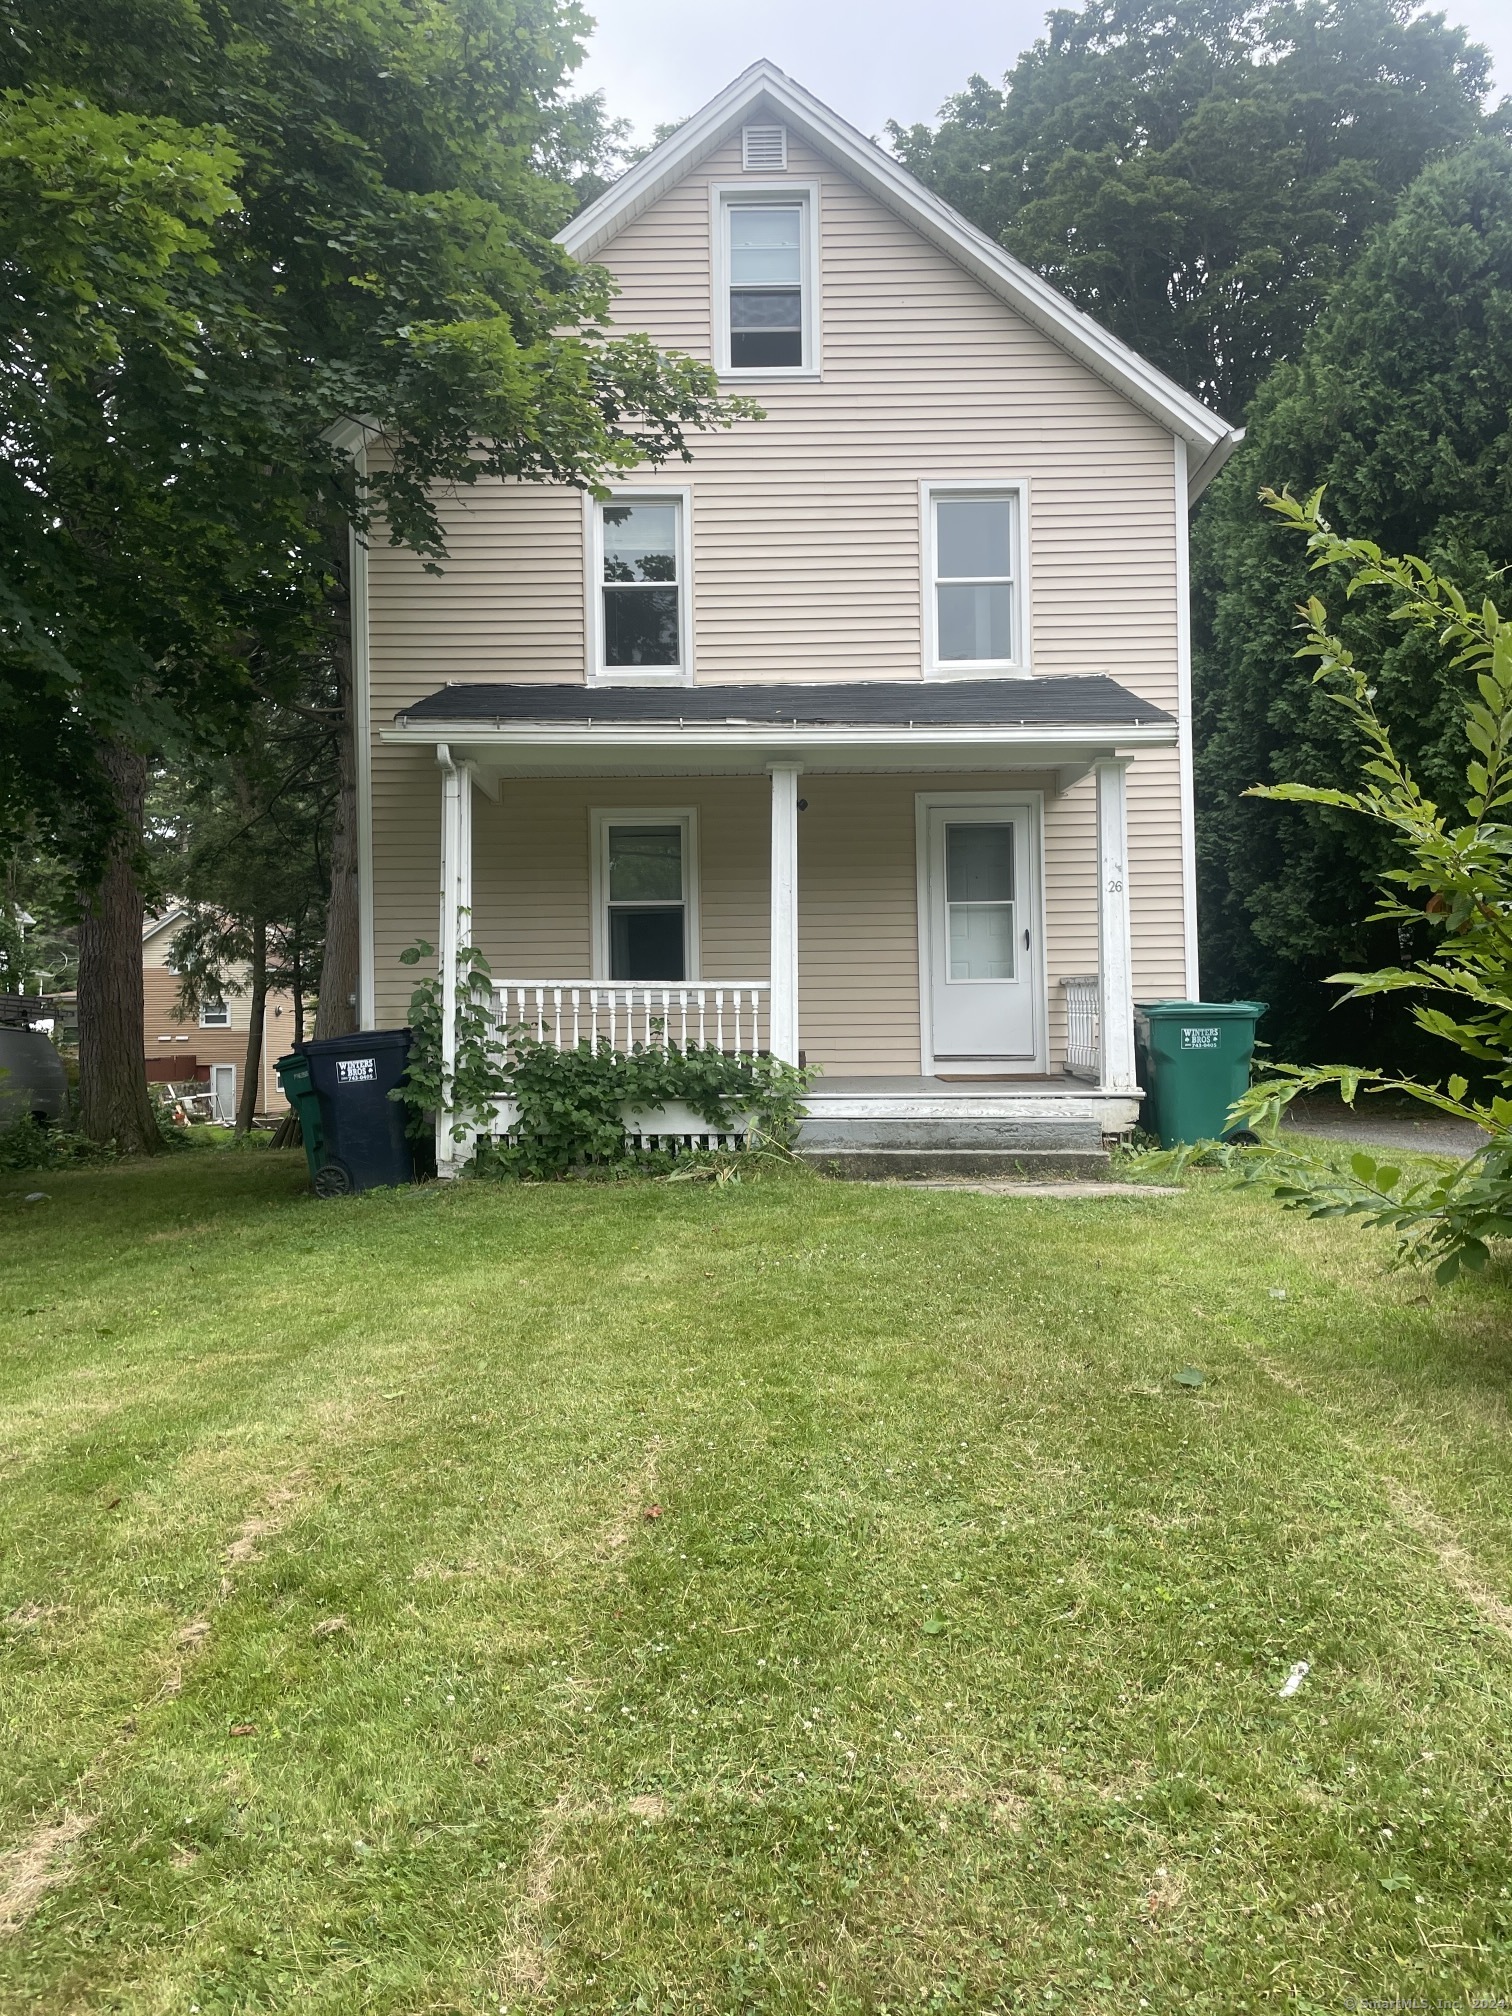 Rental Property at 26 Stoddard Street, Seymour, Connecticut - Bedrooms: 3 
Bathrooms: 3 
Rooms: 7  - $1,450 MO.